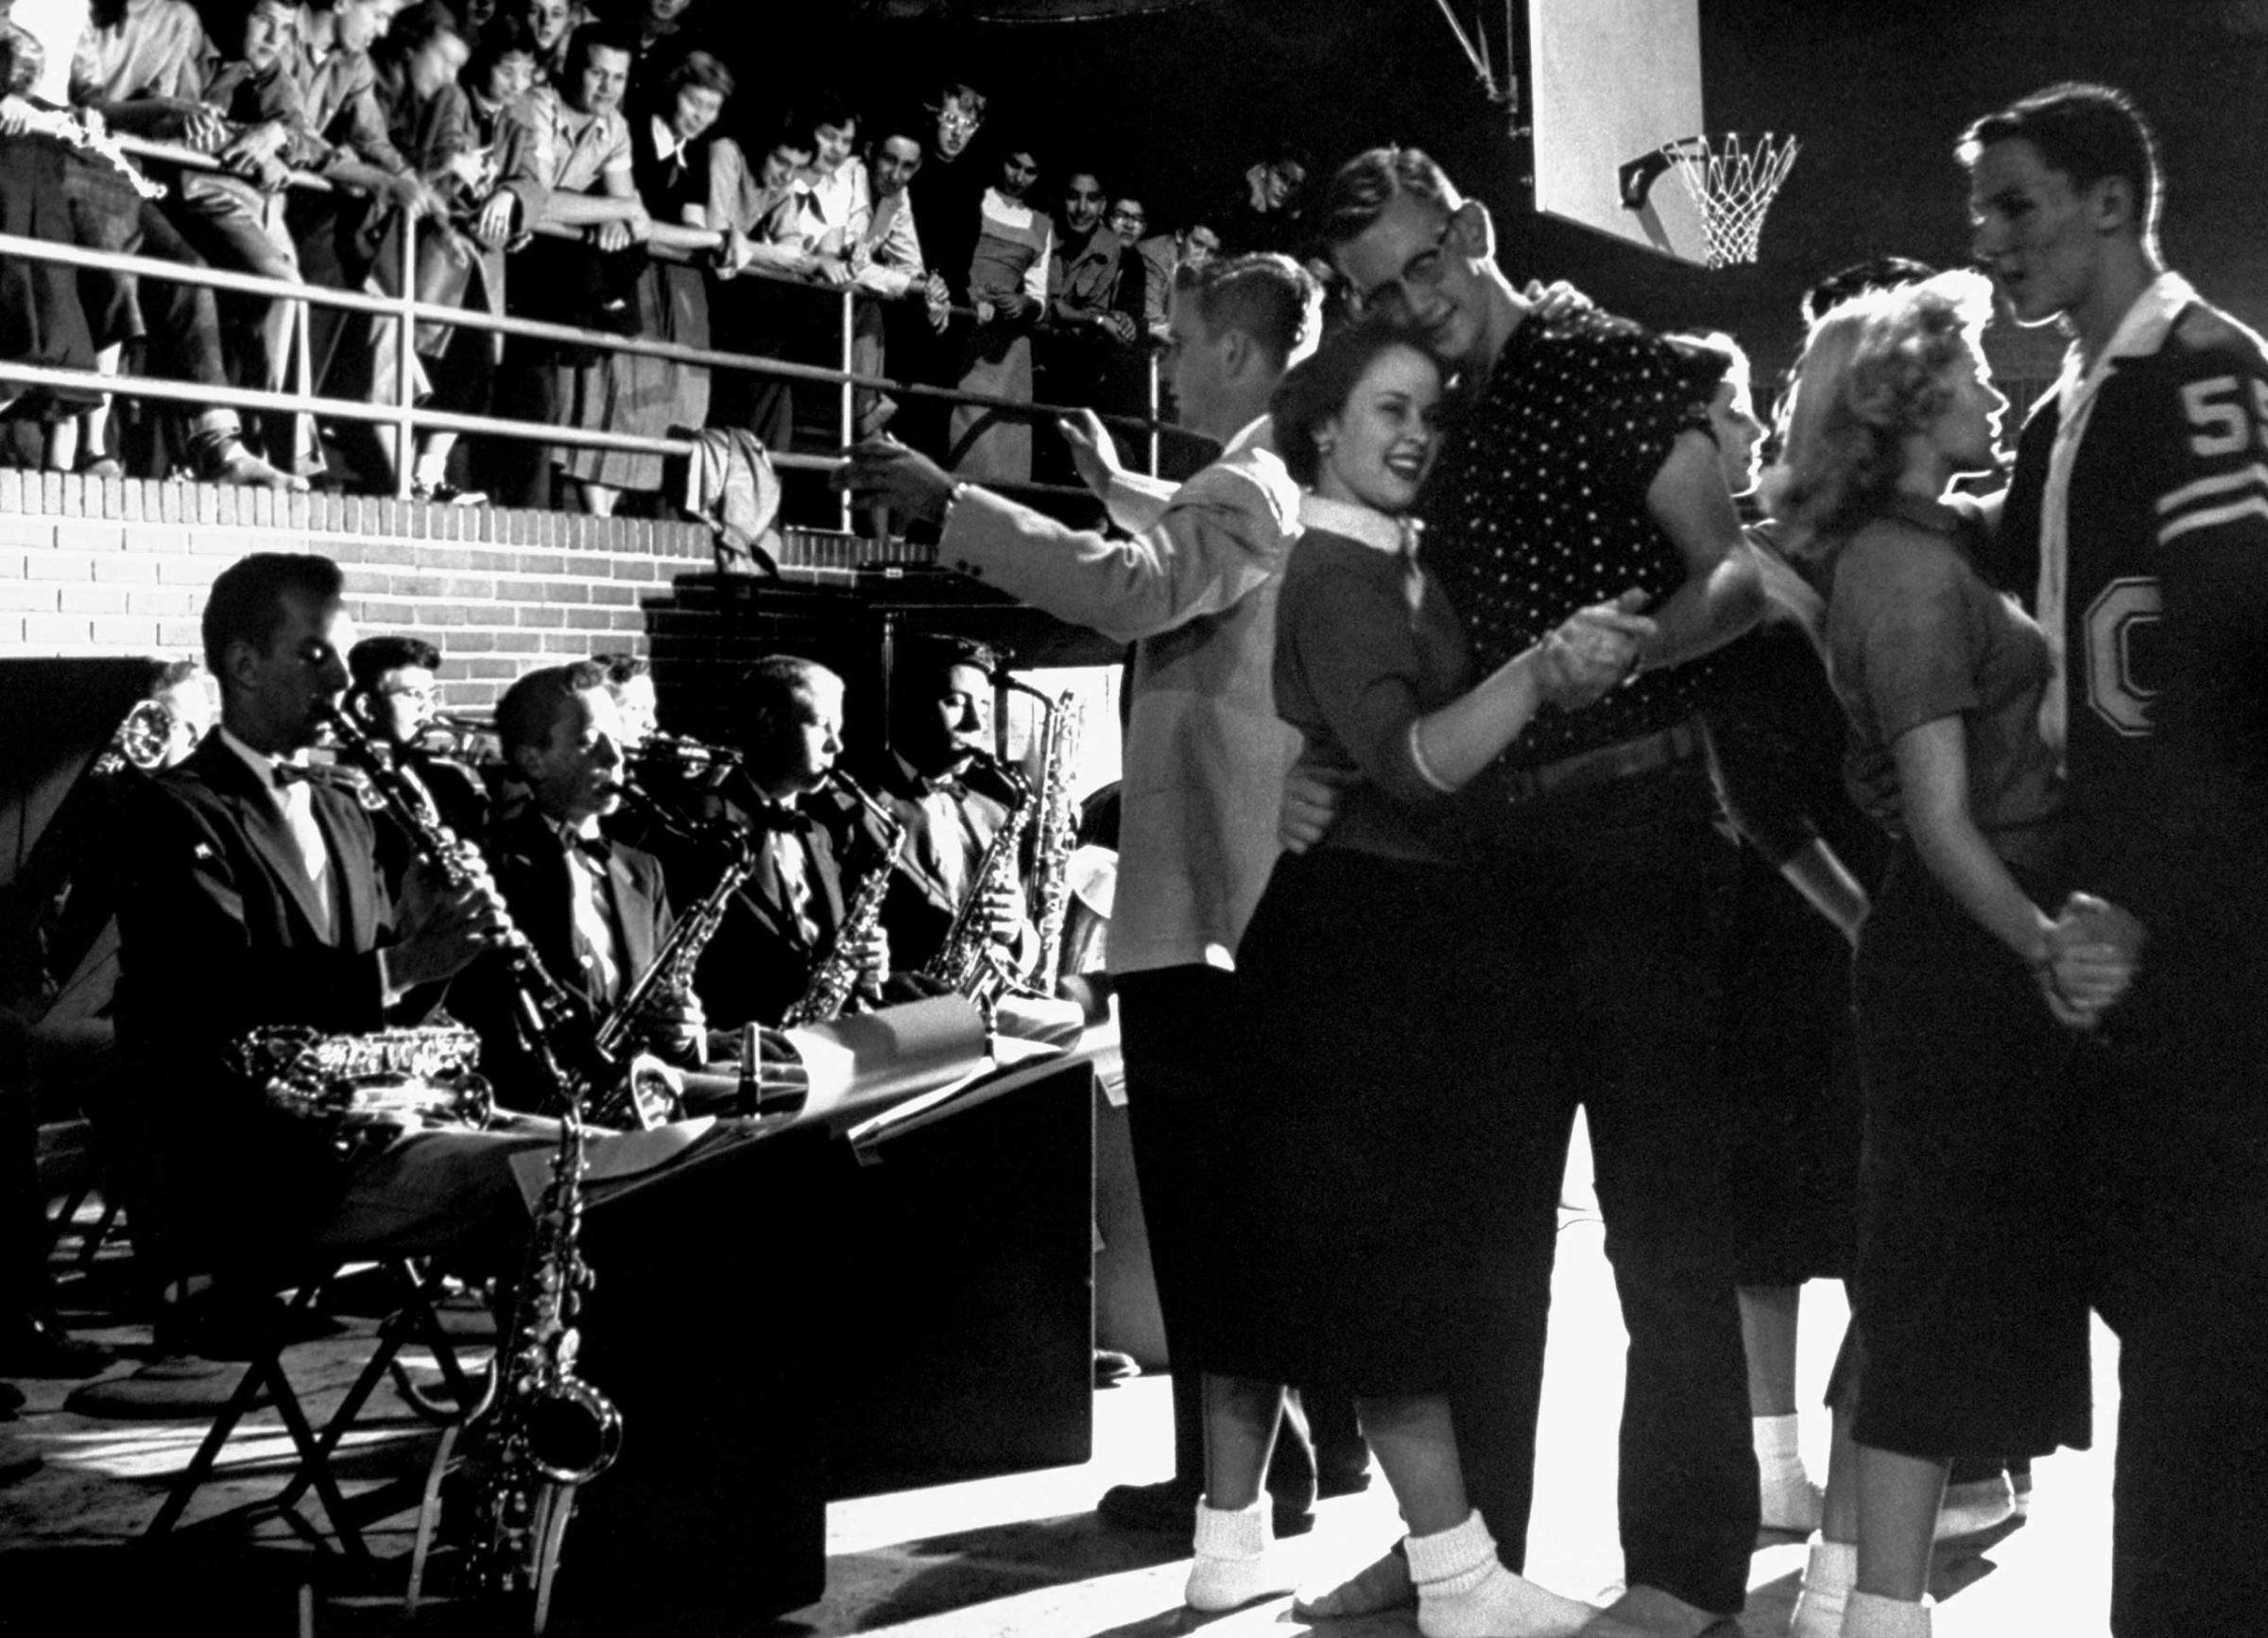 Students dance at a Carlsbad, Calif., high school in 1954.